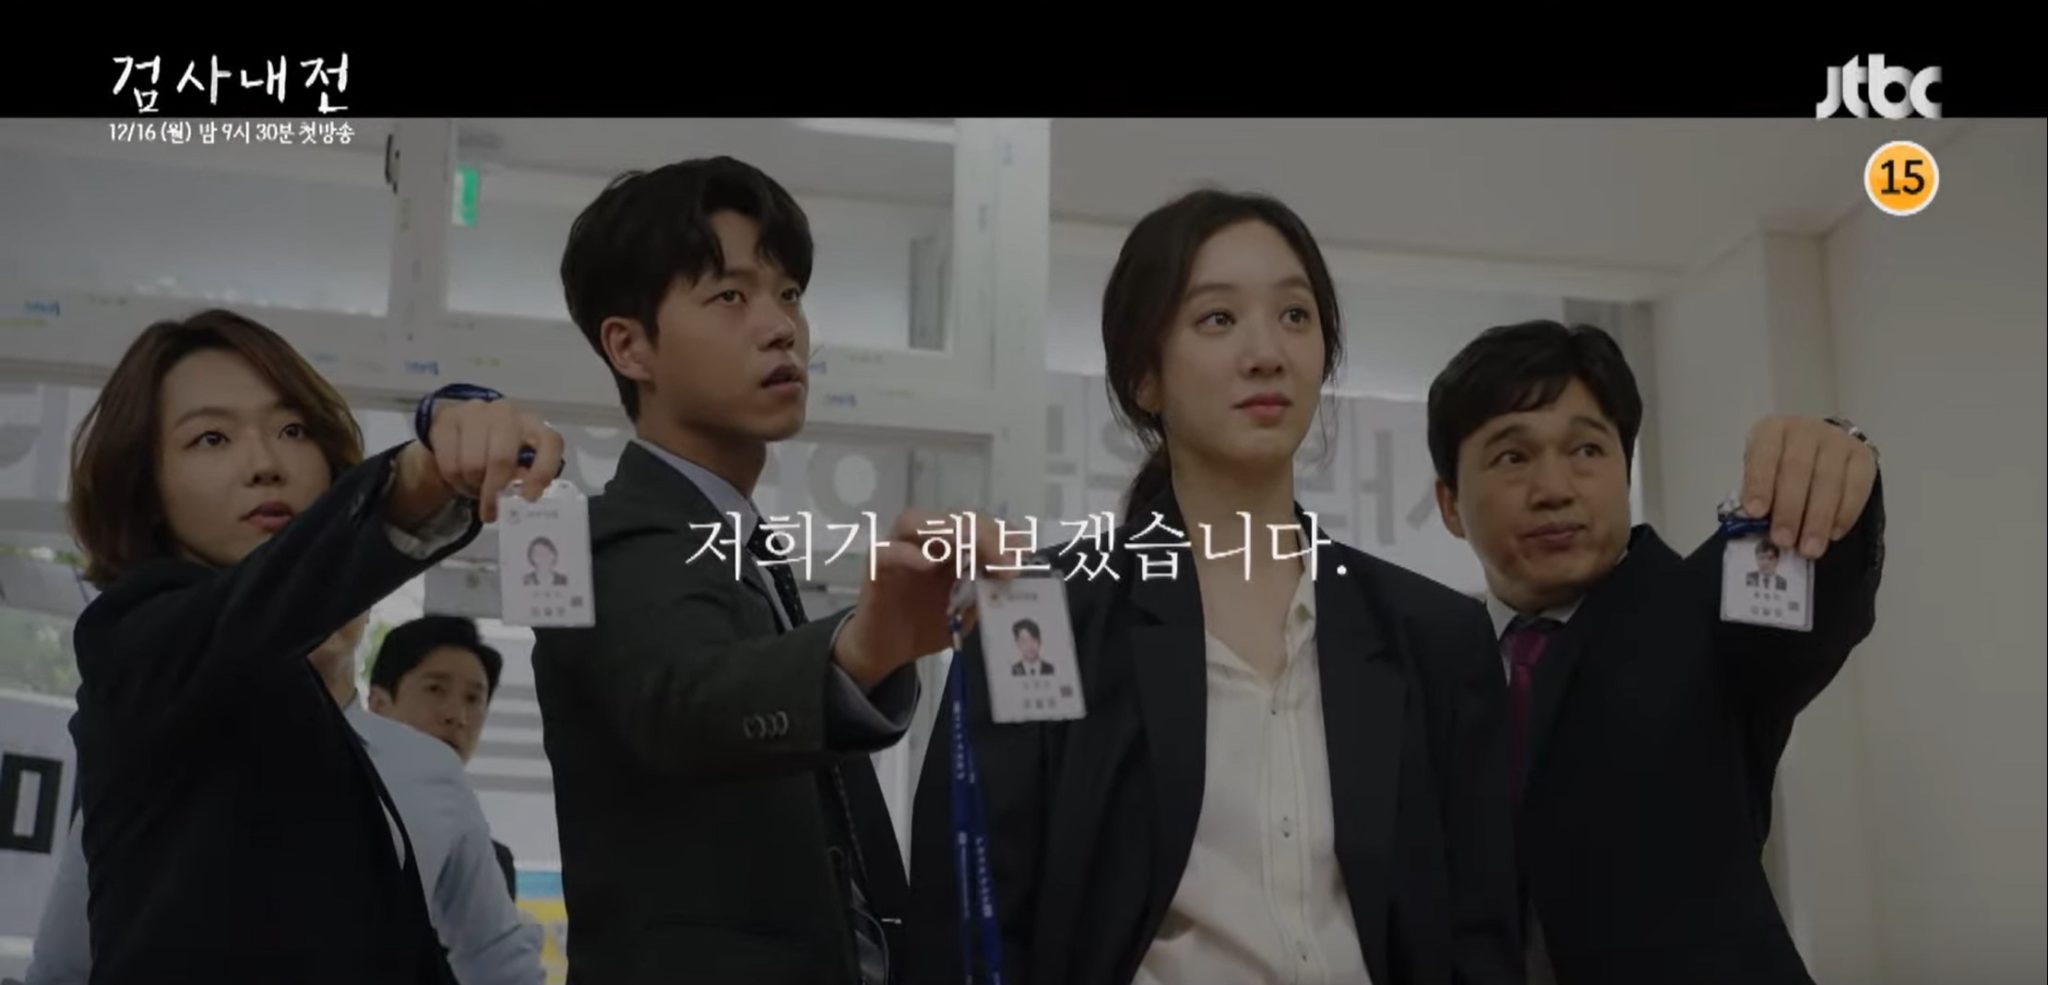 Jung Ryeo-won, Lee Seon-kyun take a stand in new teaser for Diary of a Prosecutor